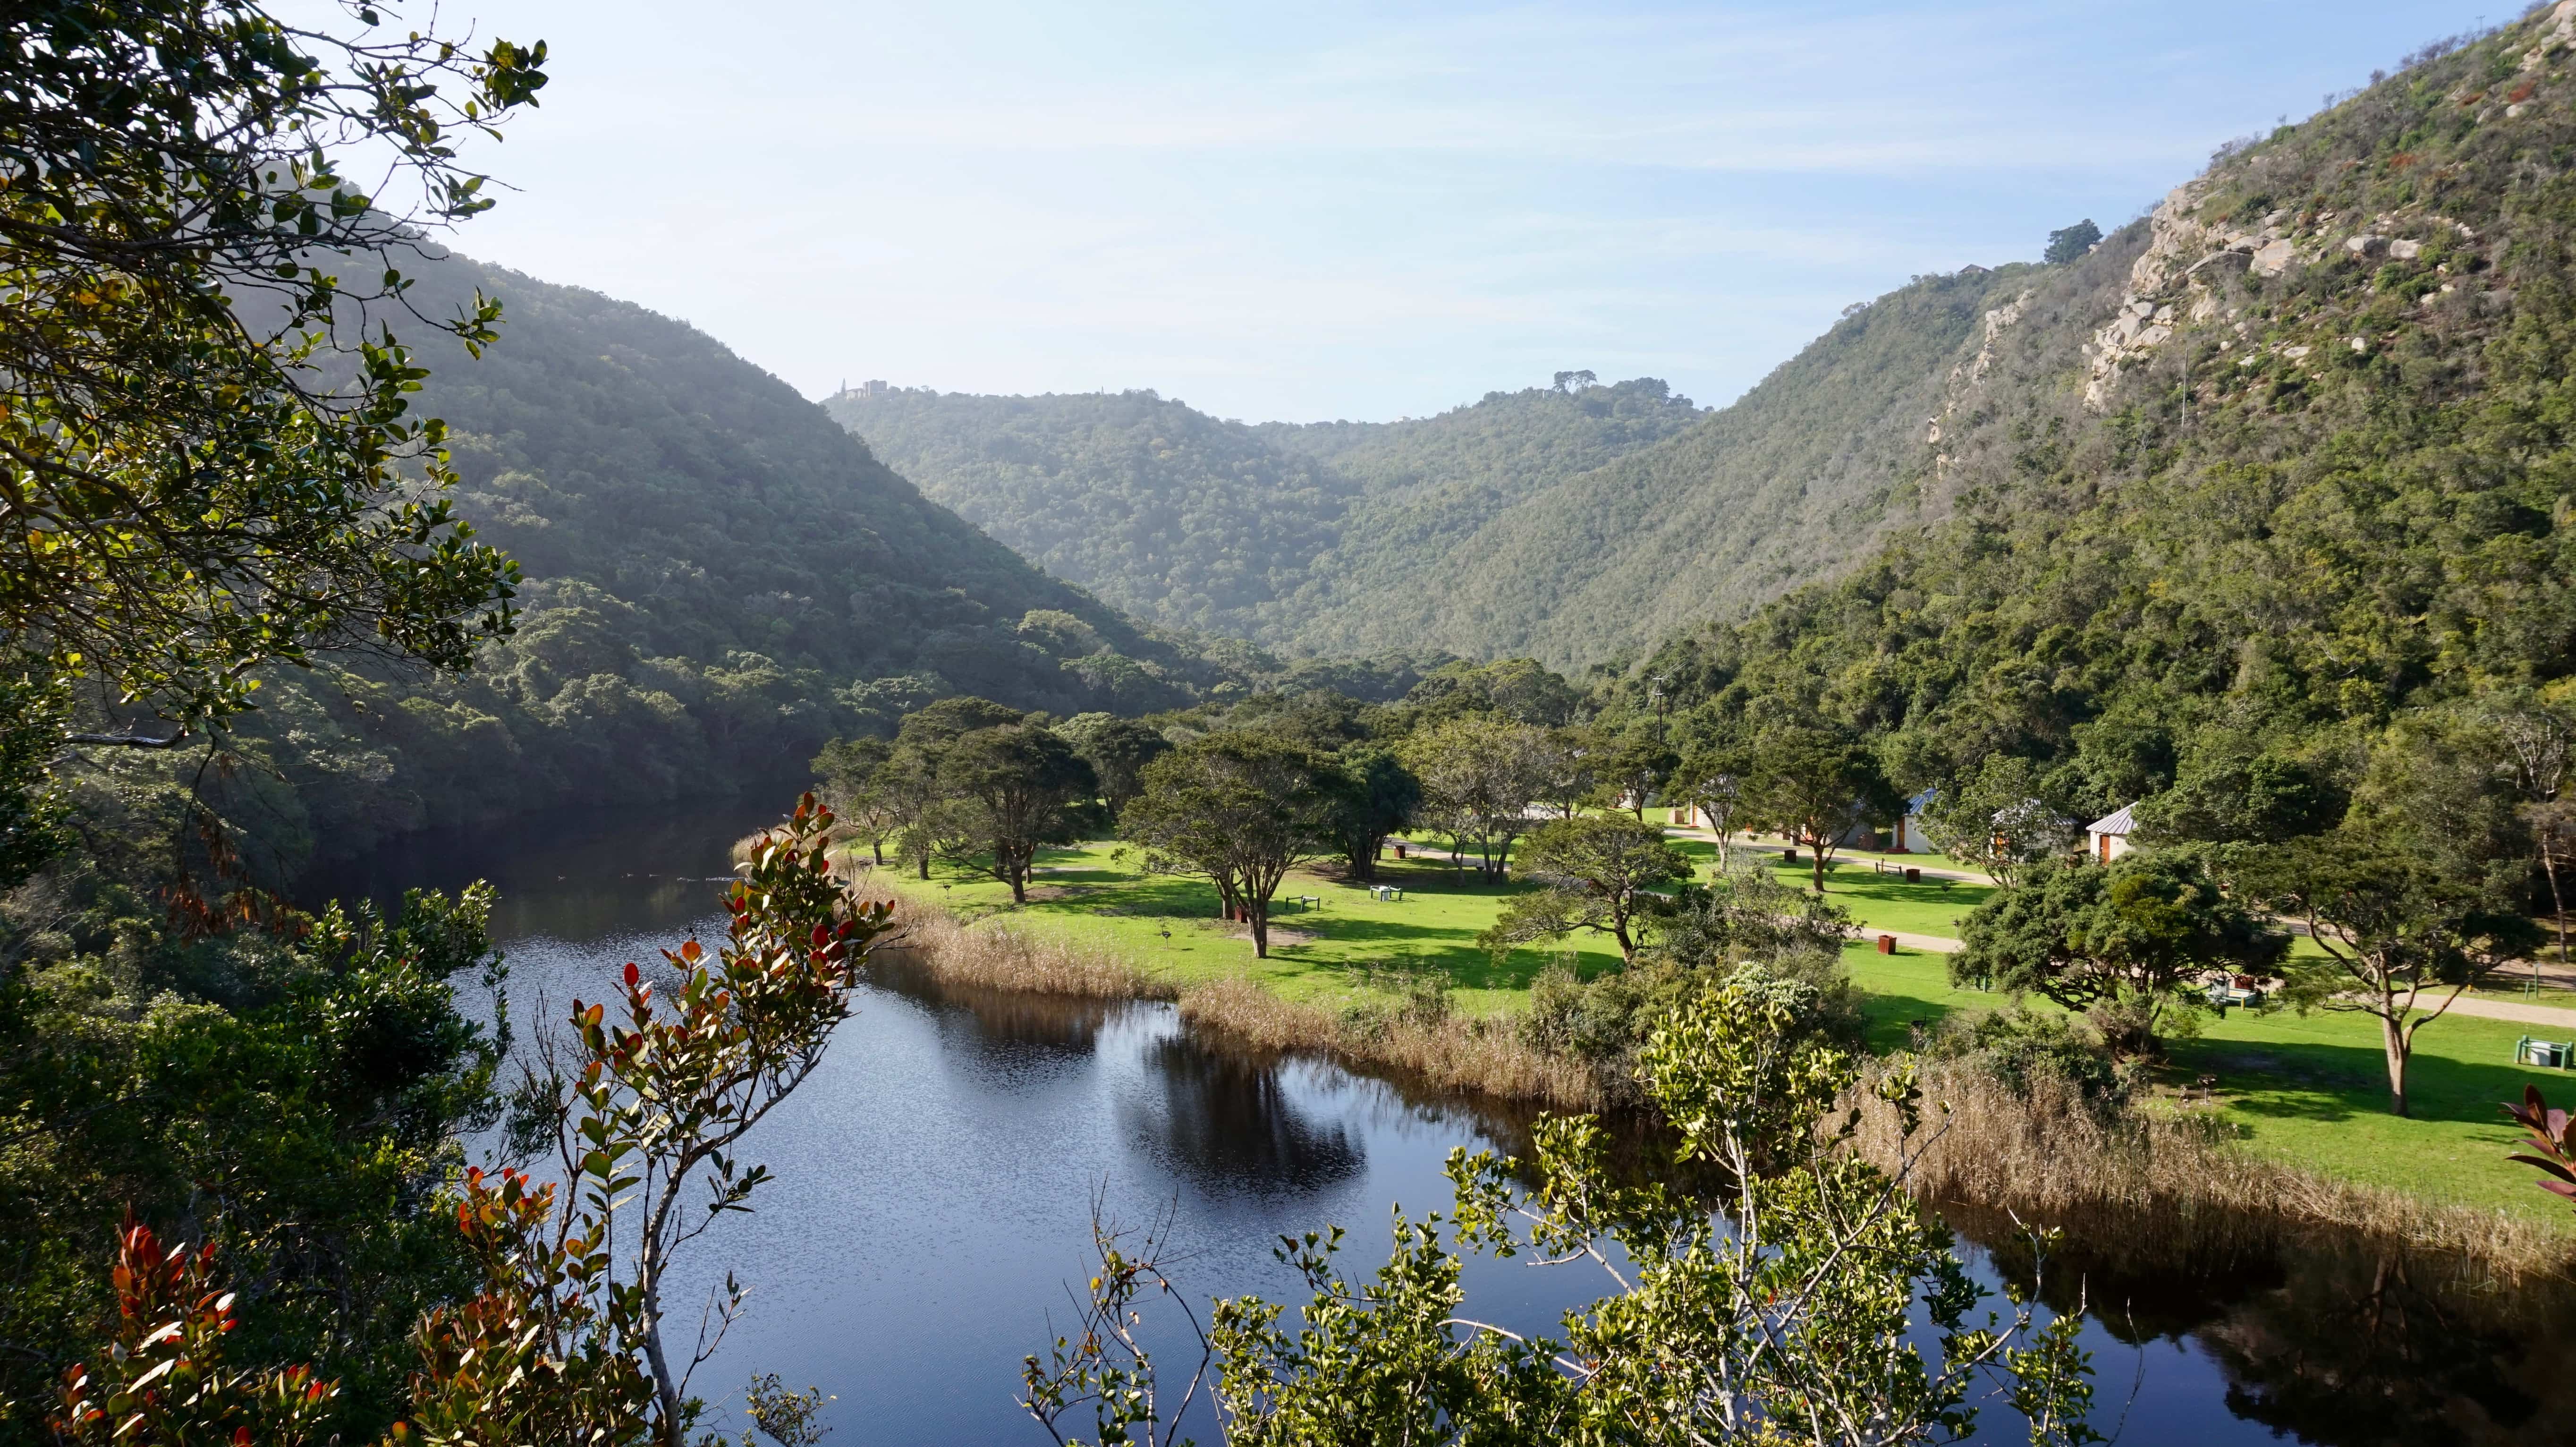 Garden Route National Park, Wilderness section, view over the river